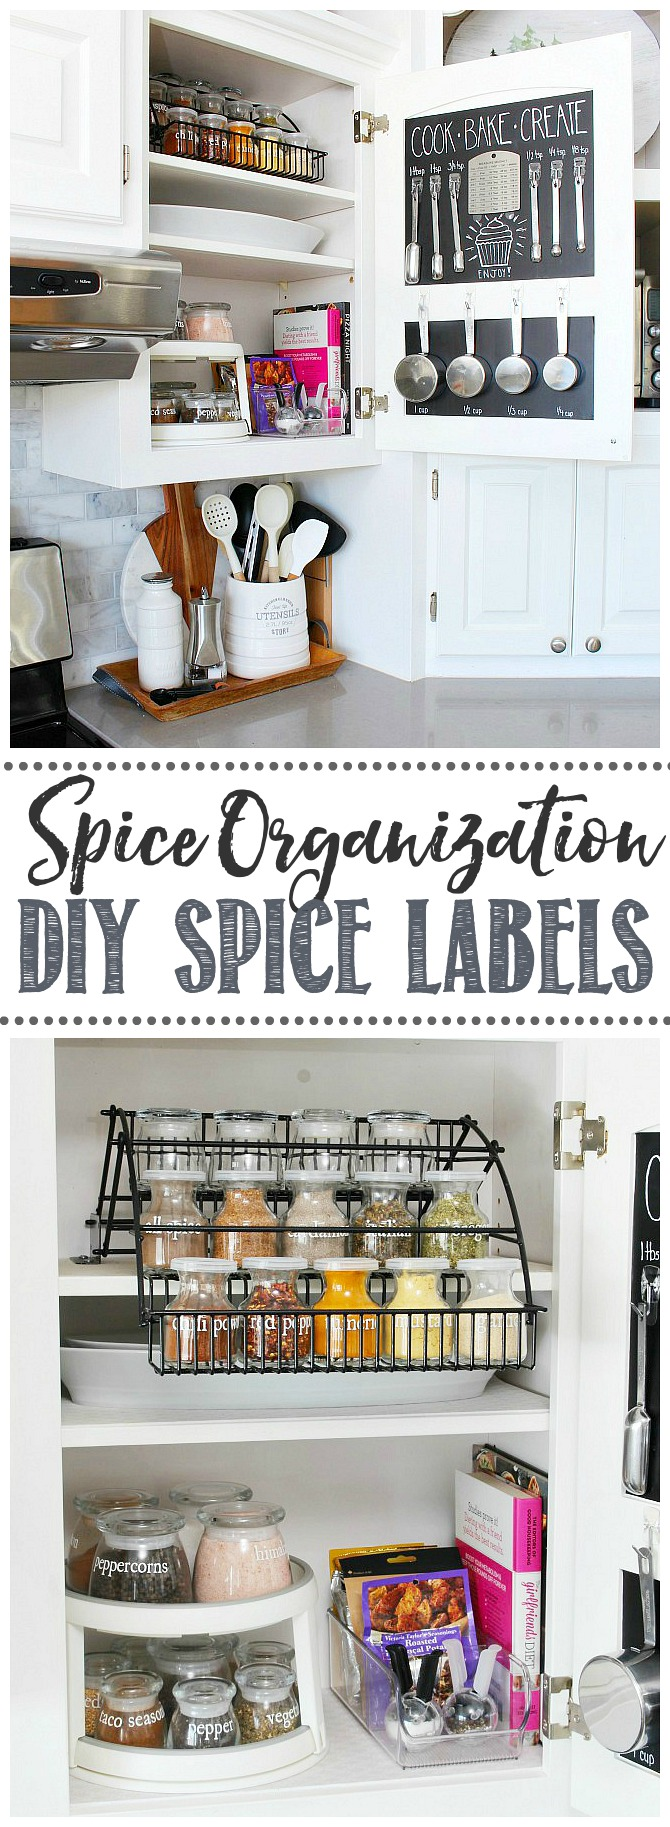 Spice Jar Labels and Spice Organization Ideas - Clean and Scentsible - Spice Jar Labels and Spice Organization Ideas - Clean and Scentsible -   19 diy Organization spices ideas